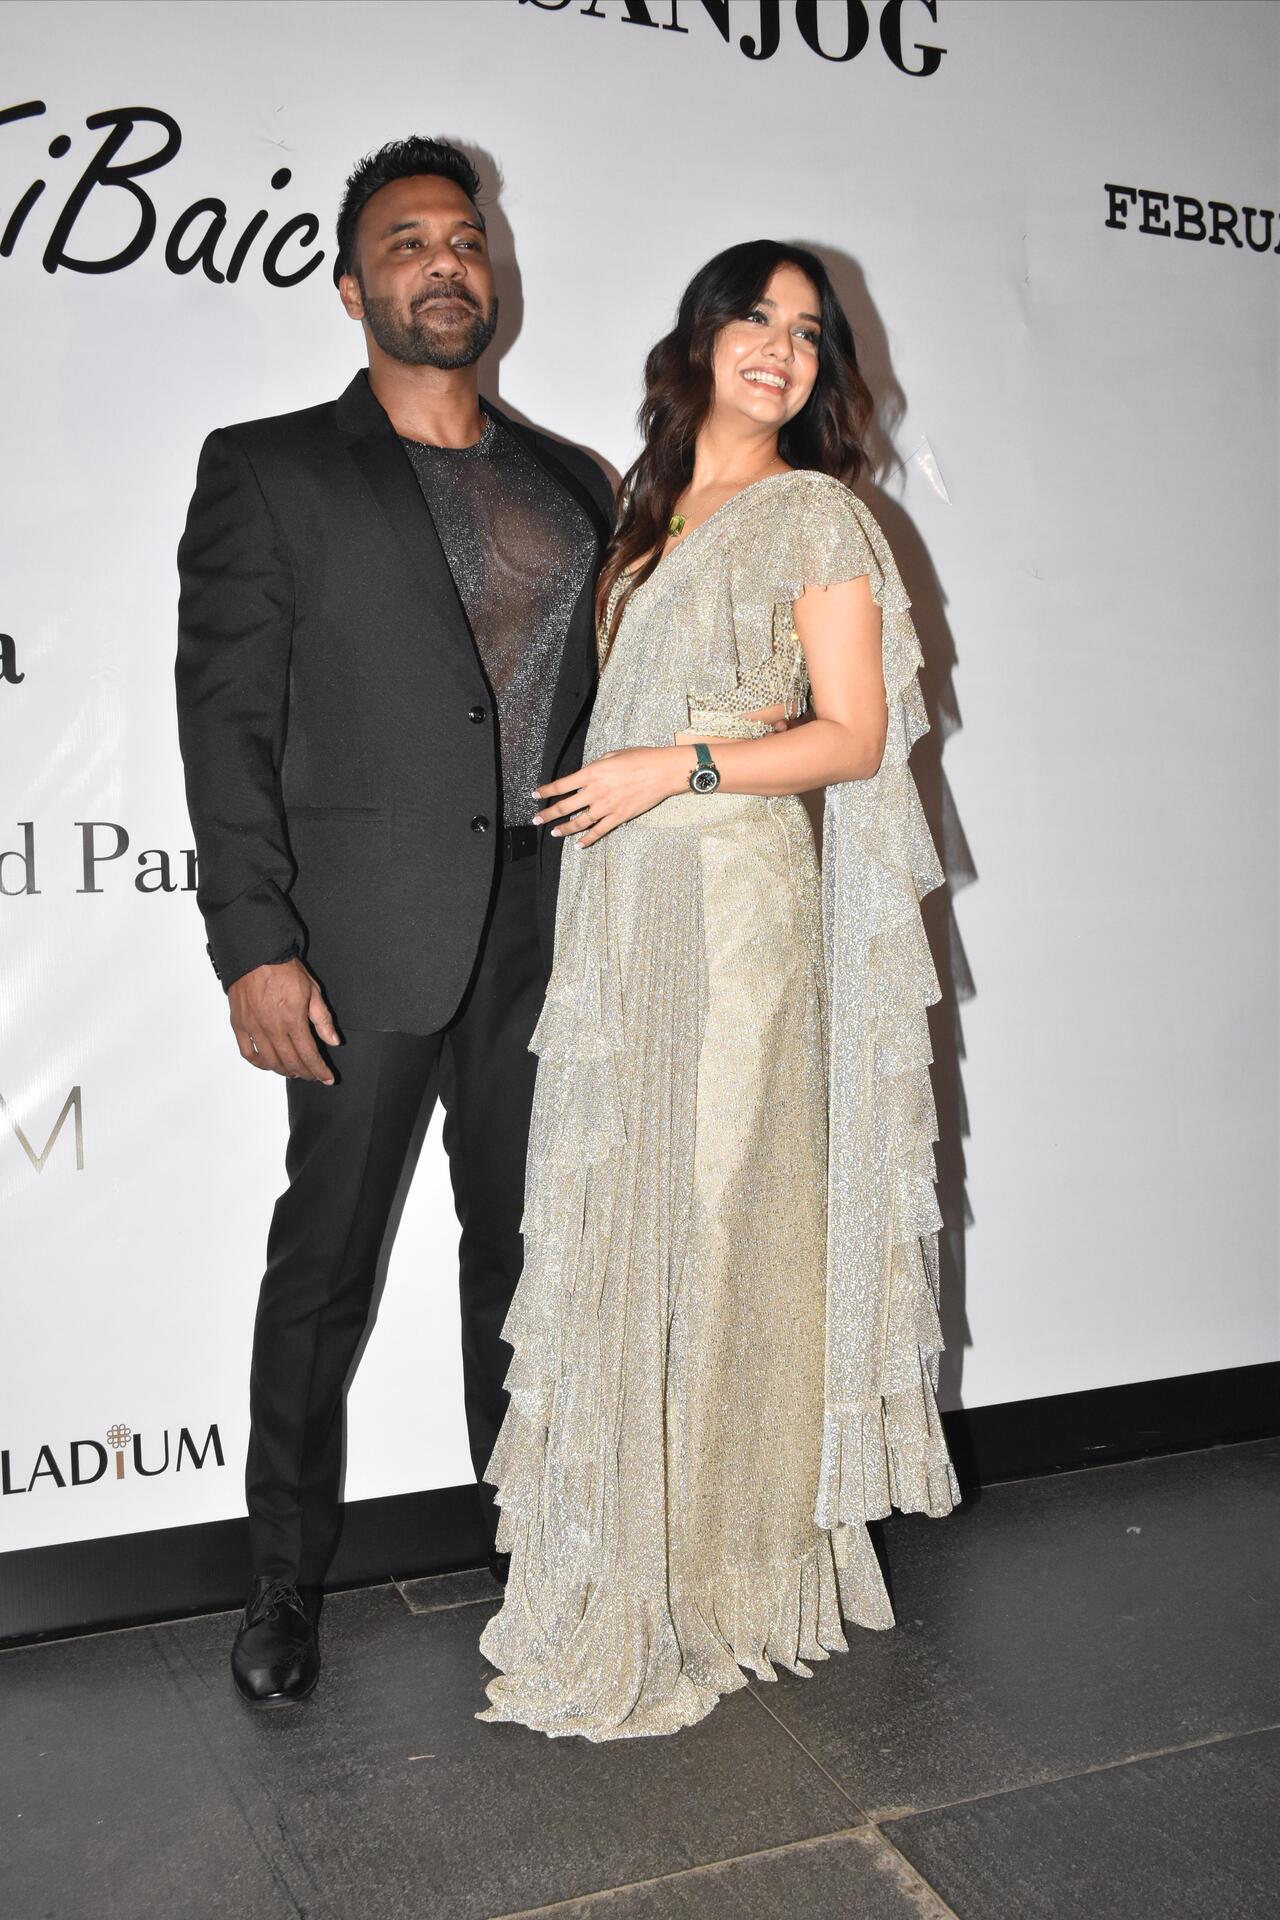 Lovebirds Divya Agarwal and Apurva Padgaonkar posed for the paparazzi on their cocktail night with the former wearing a shimmery saree, and the latter keeping it classy in a black suit